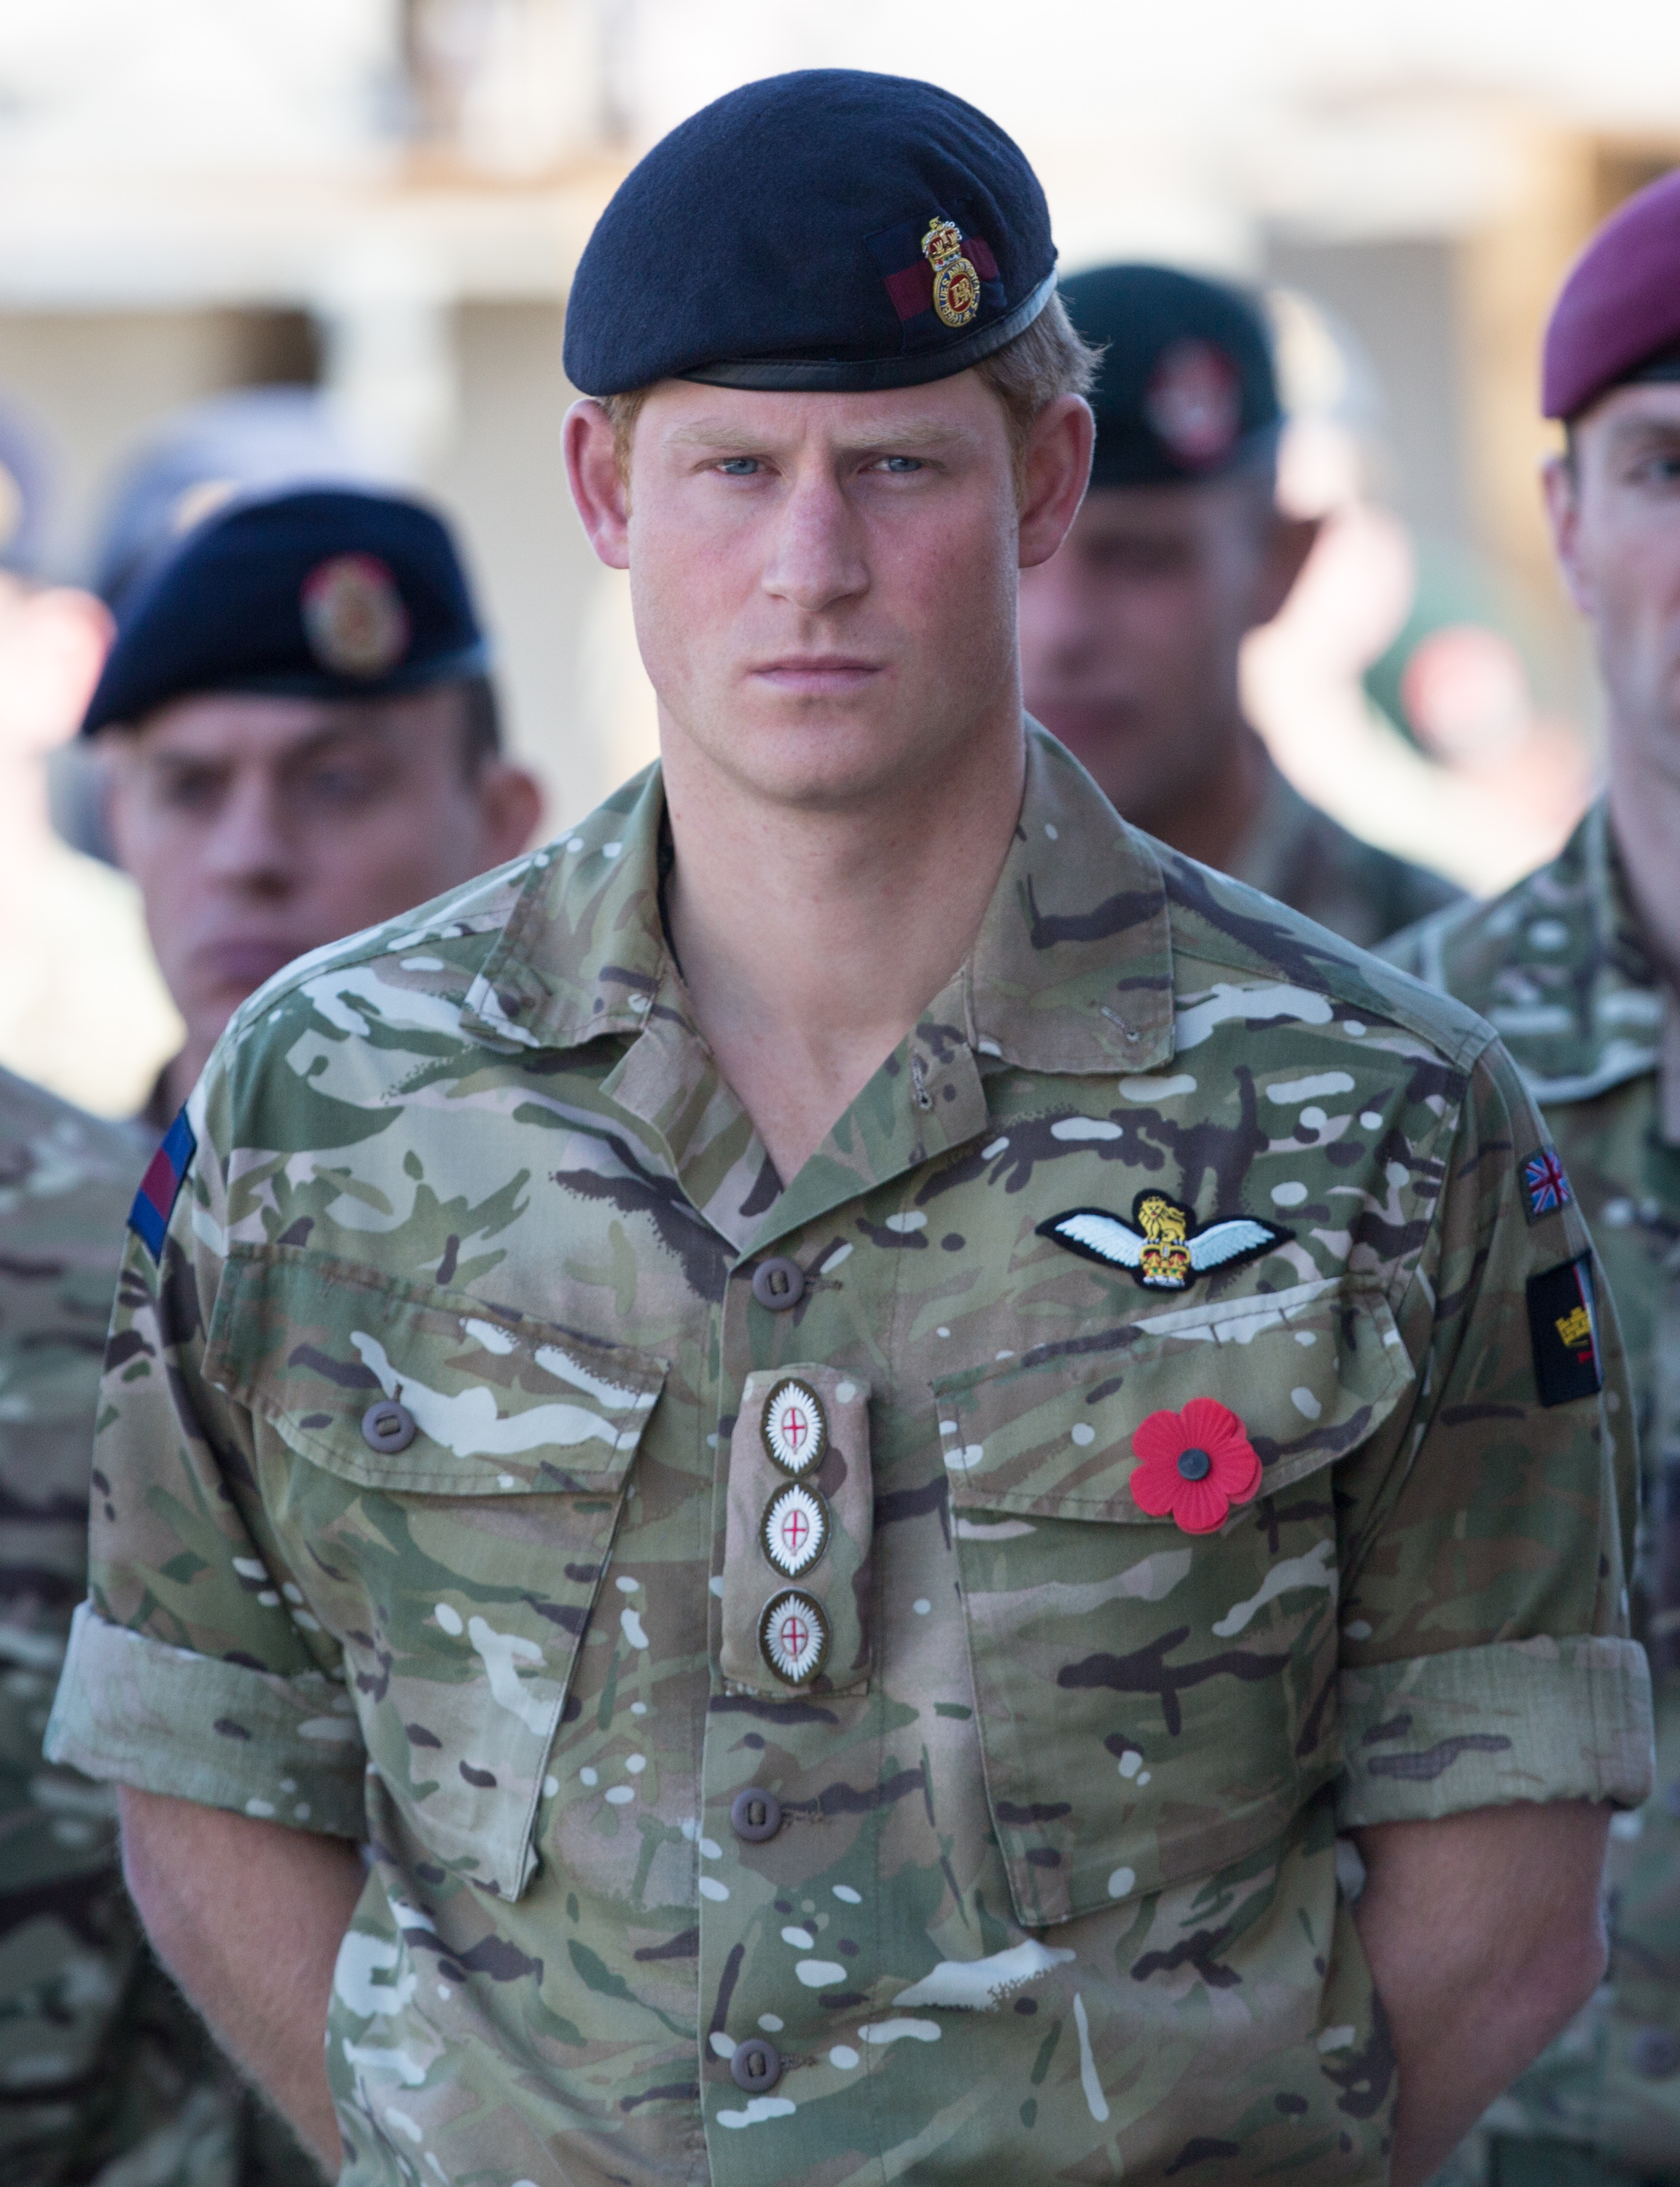 Prince Harry in the army.